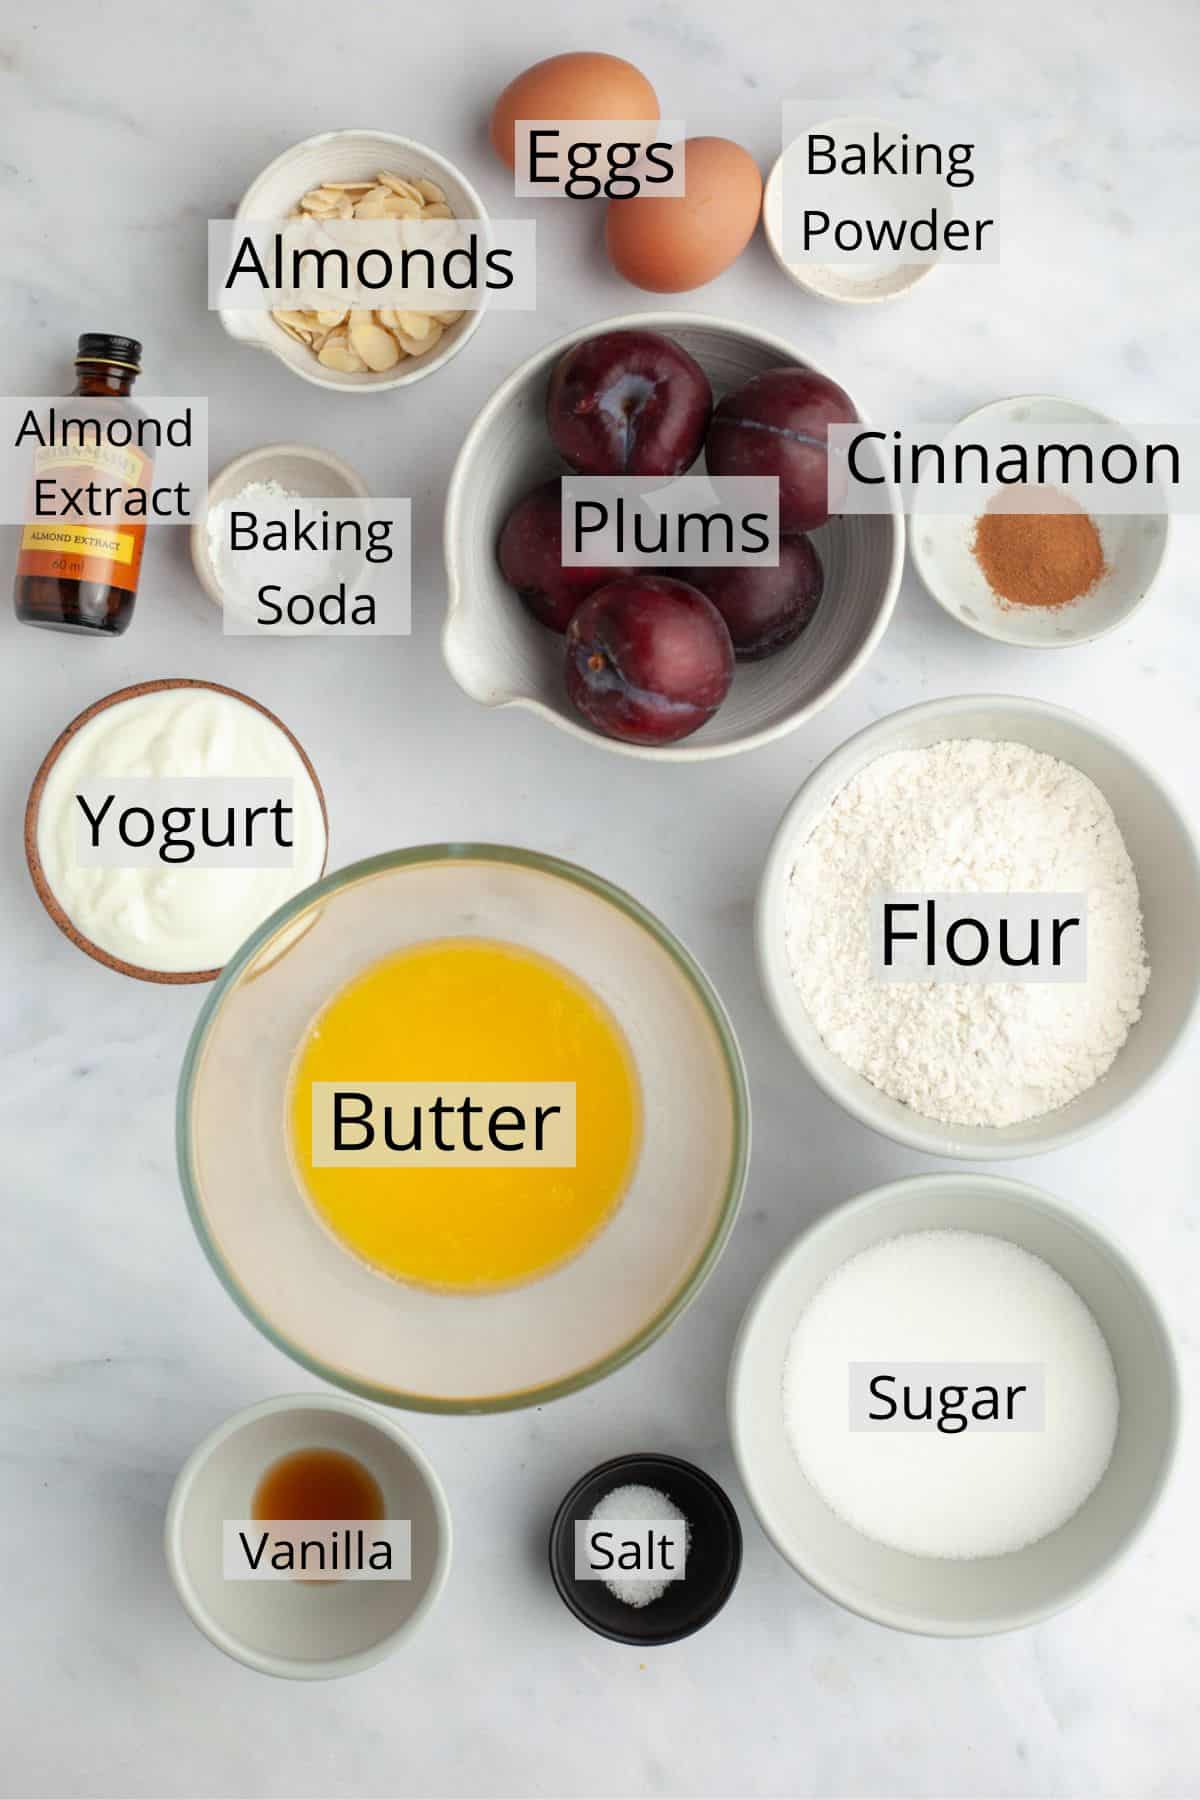 All the ingredients needed to make yogurt plum cake weighed out into small bowls.